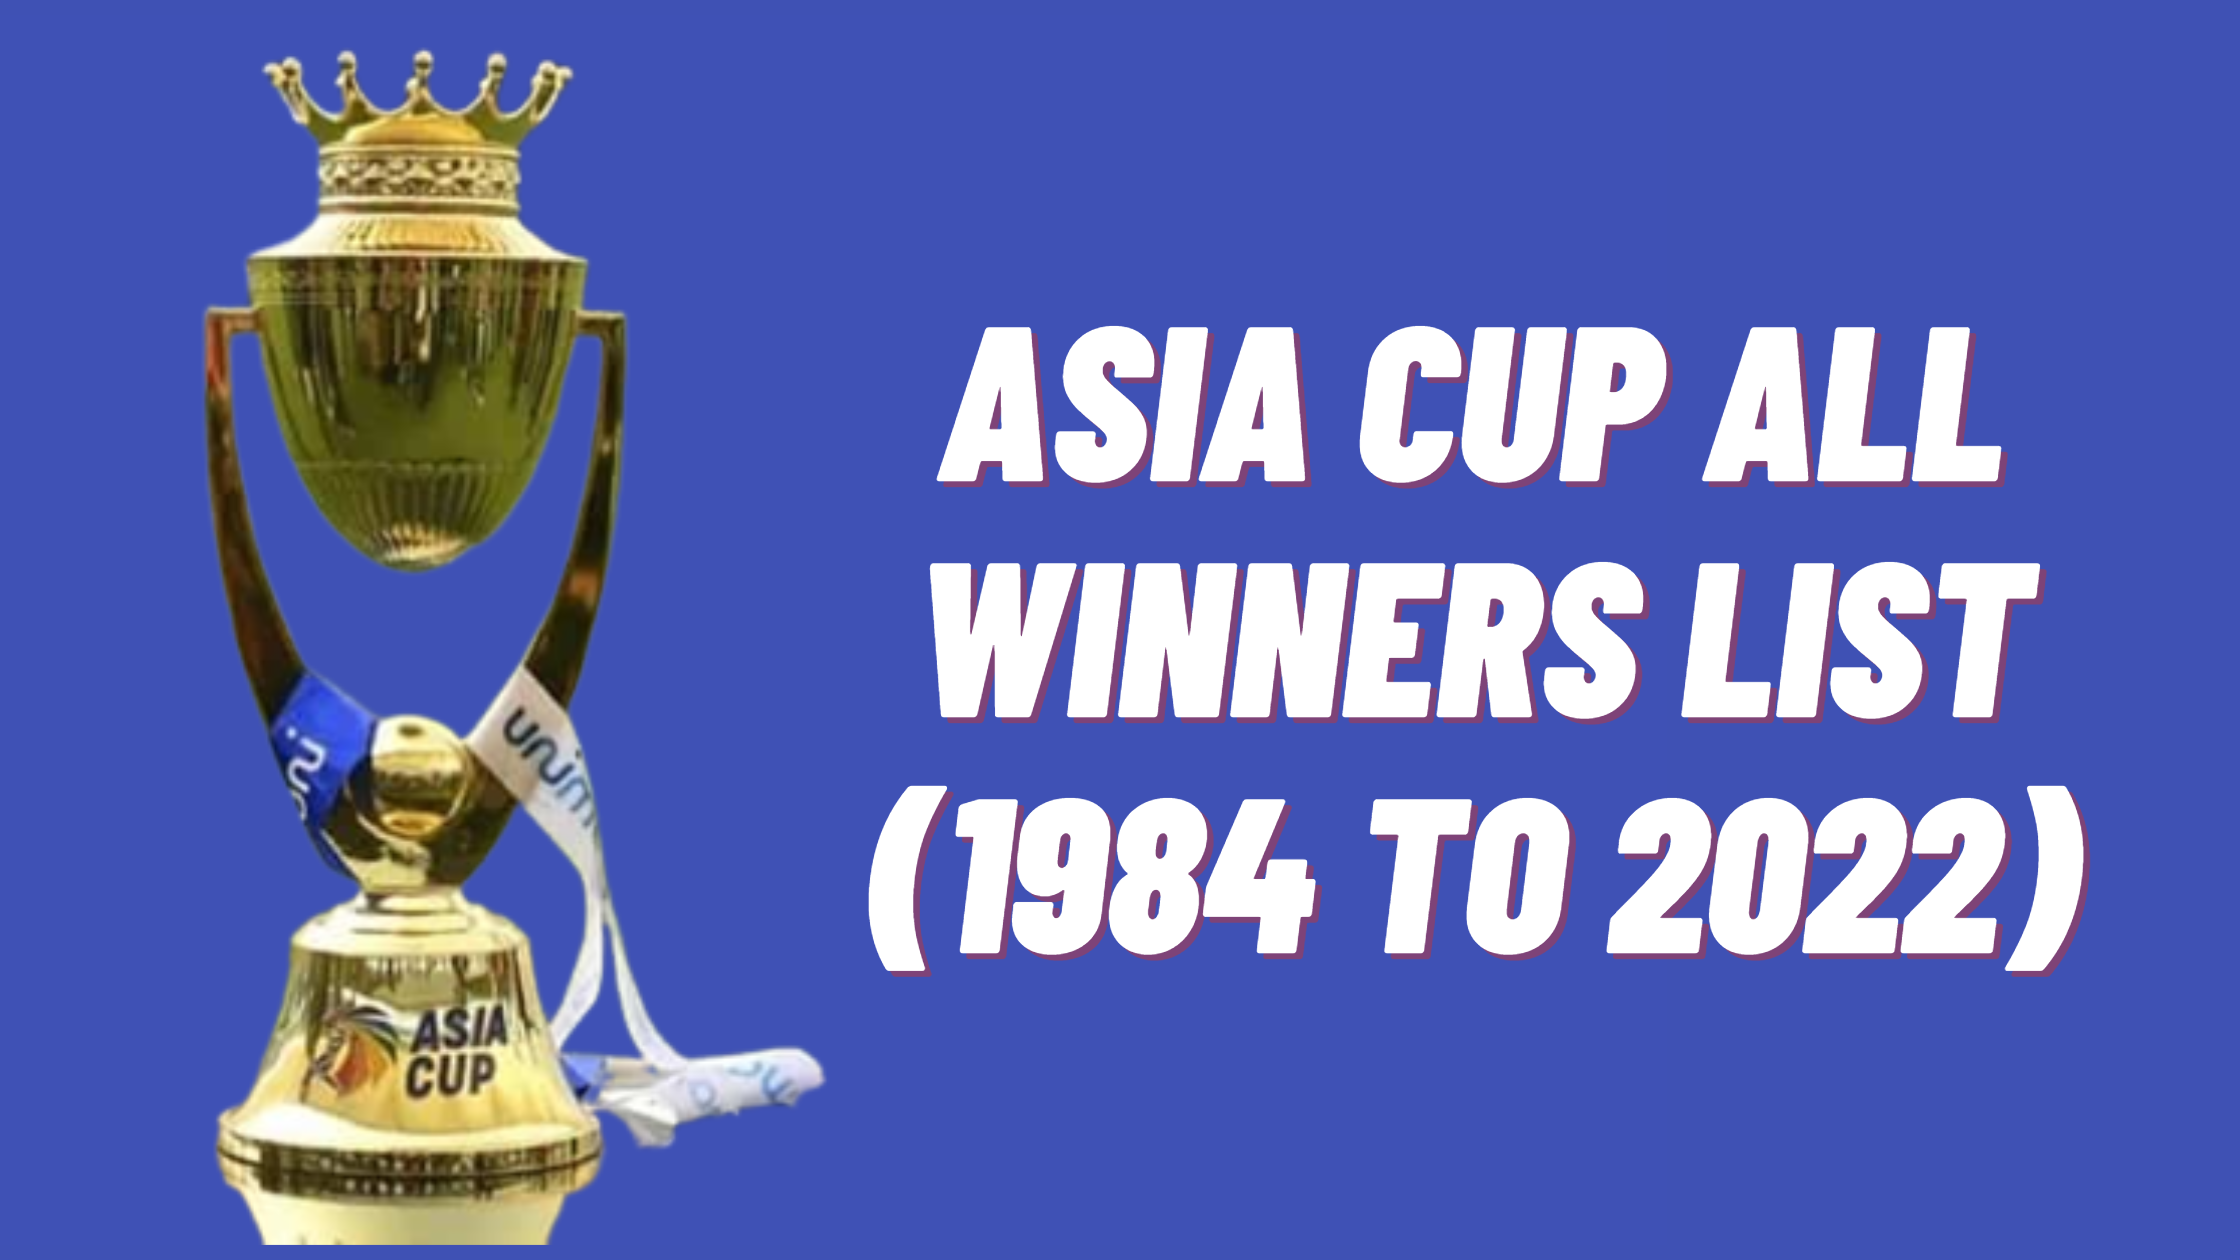 Asia Cup All Winners List